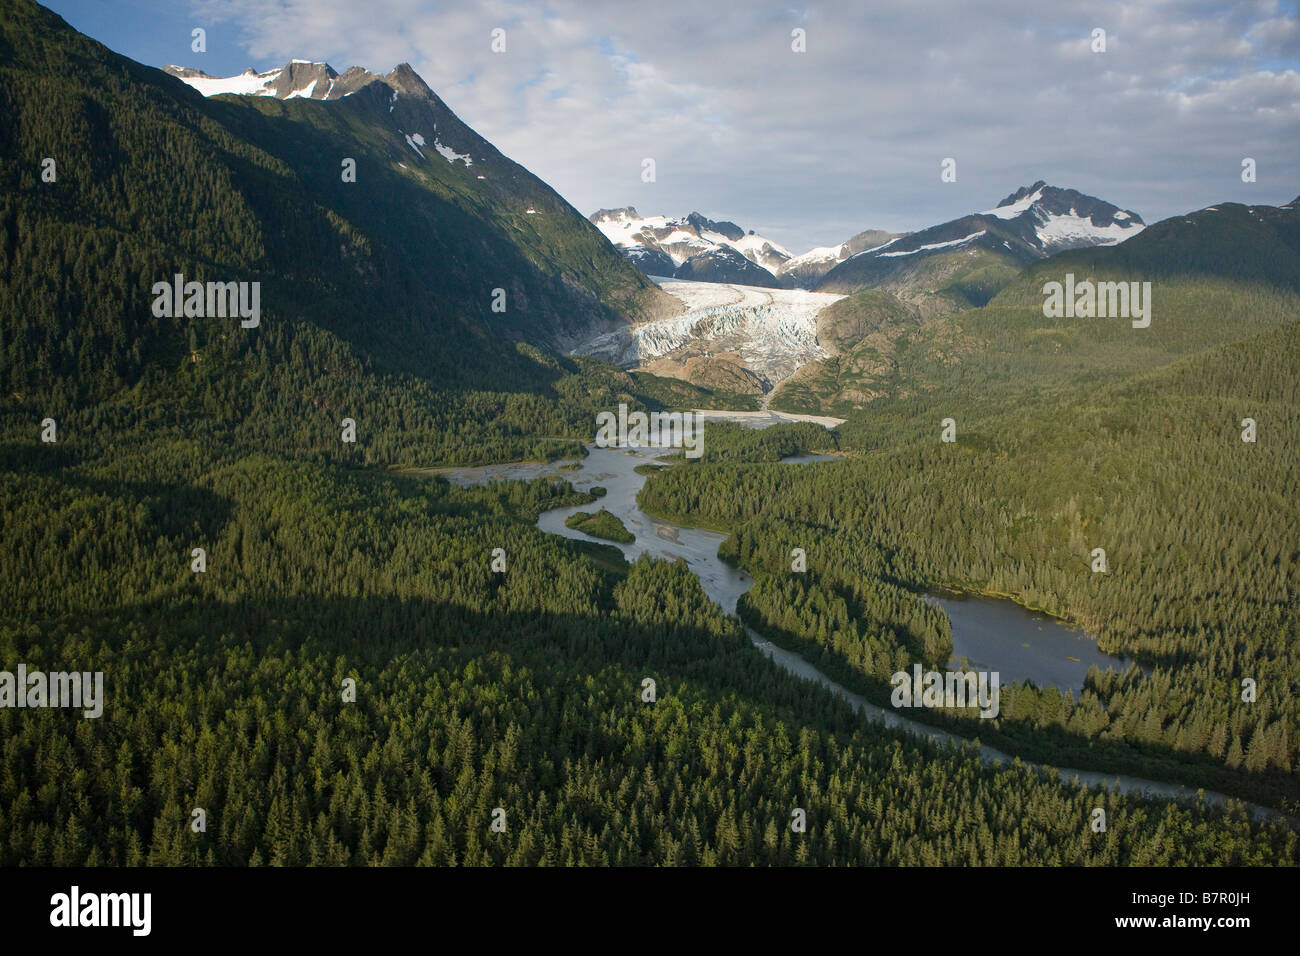 Aerial view of Herbert Glacier and river as it winds its way down from the Juneau Icefield, Tongass National Forest, Alaska Stock Photo